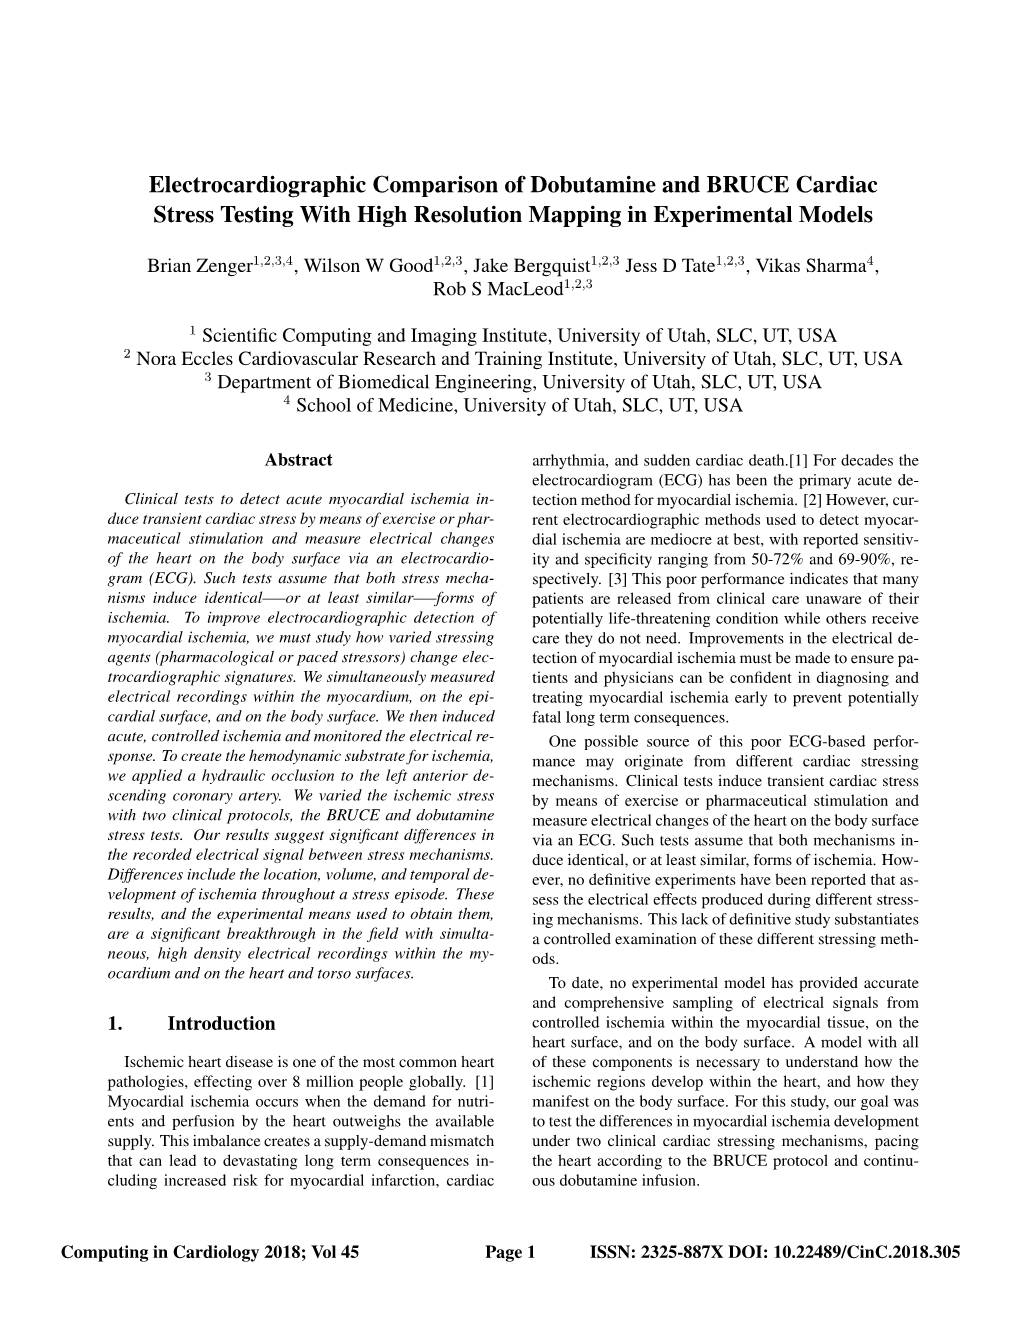 Electrocardiographic Comparison of Dobutamine and BRUCE Cardiac Stress Testing with High Resolution Mapping in Experimental Models